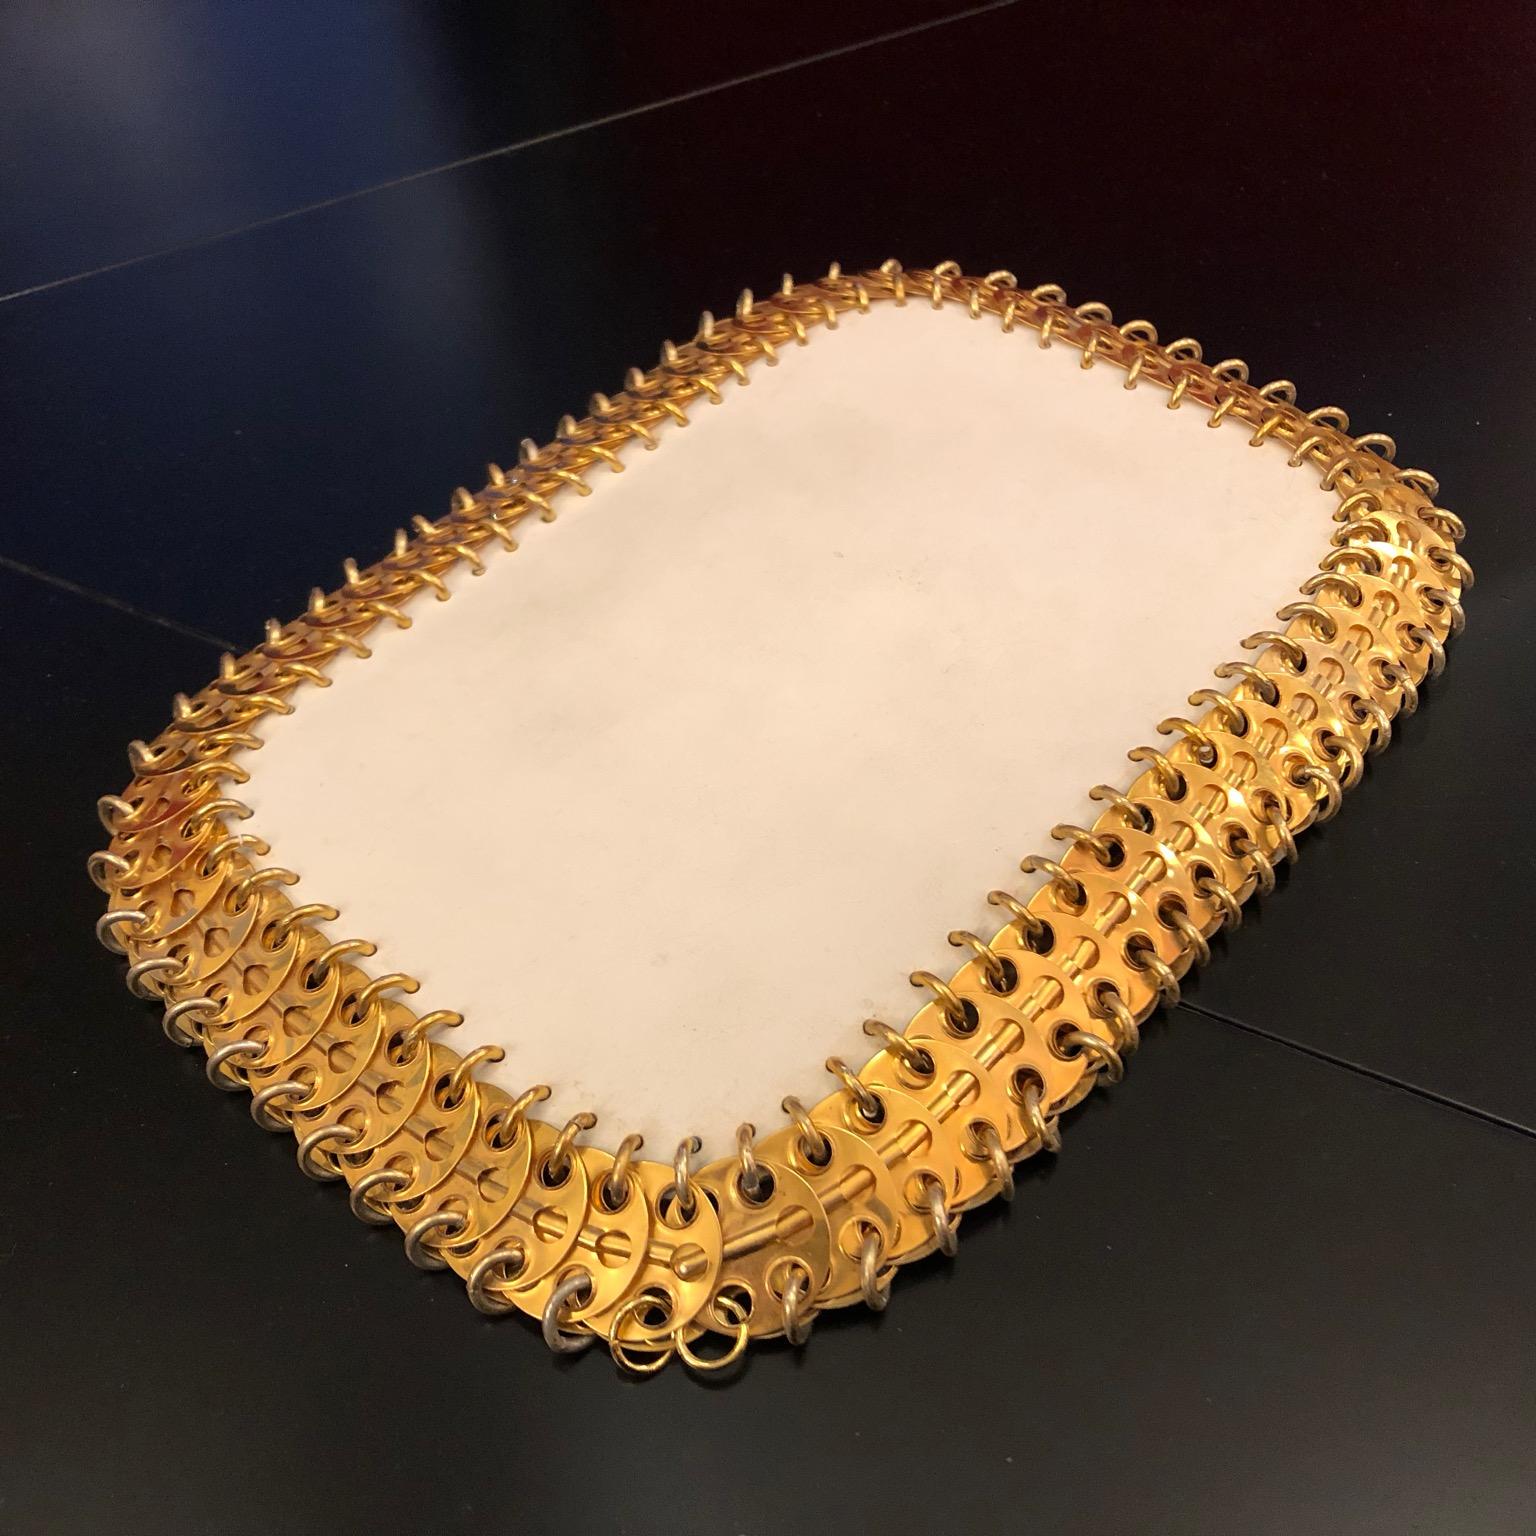 Brass Paco Rabanne, 1960s Vintage White Leather & brass Discs clutch bag, Labels For Sale